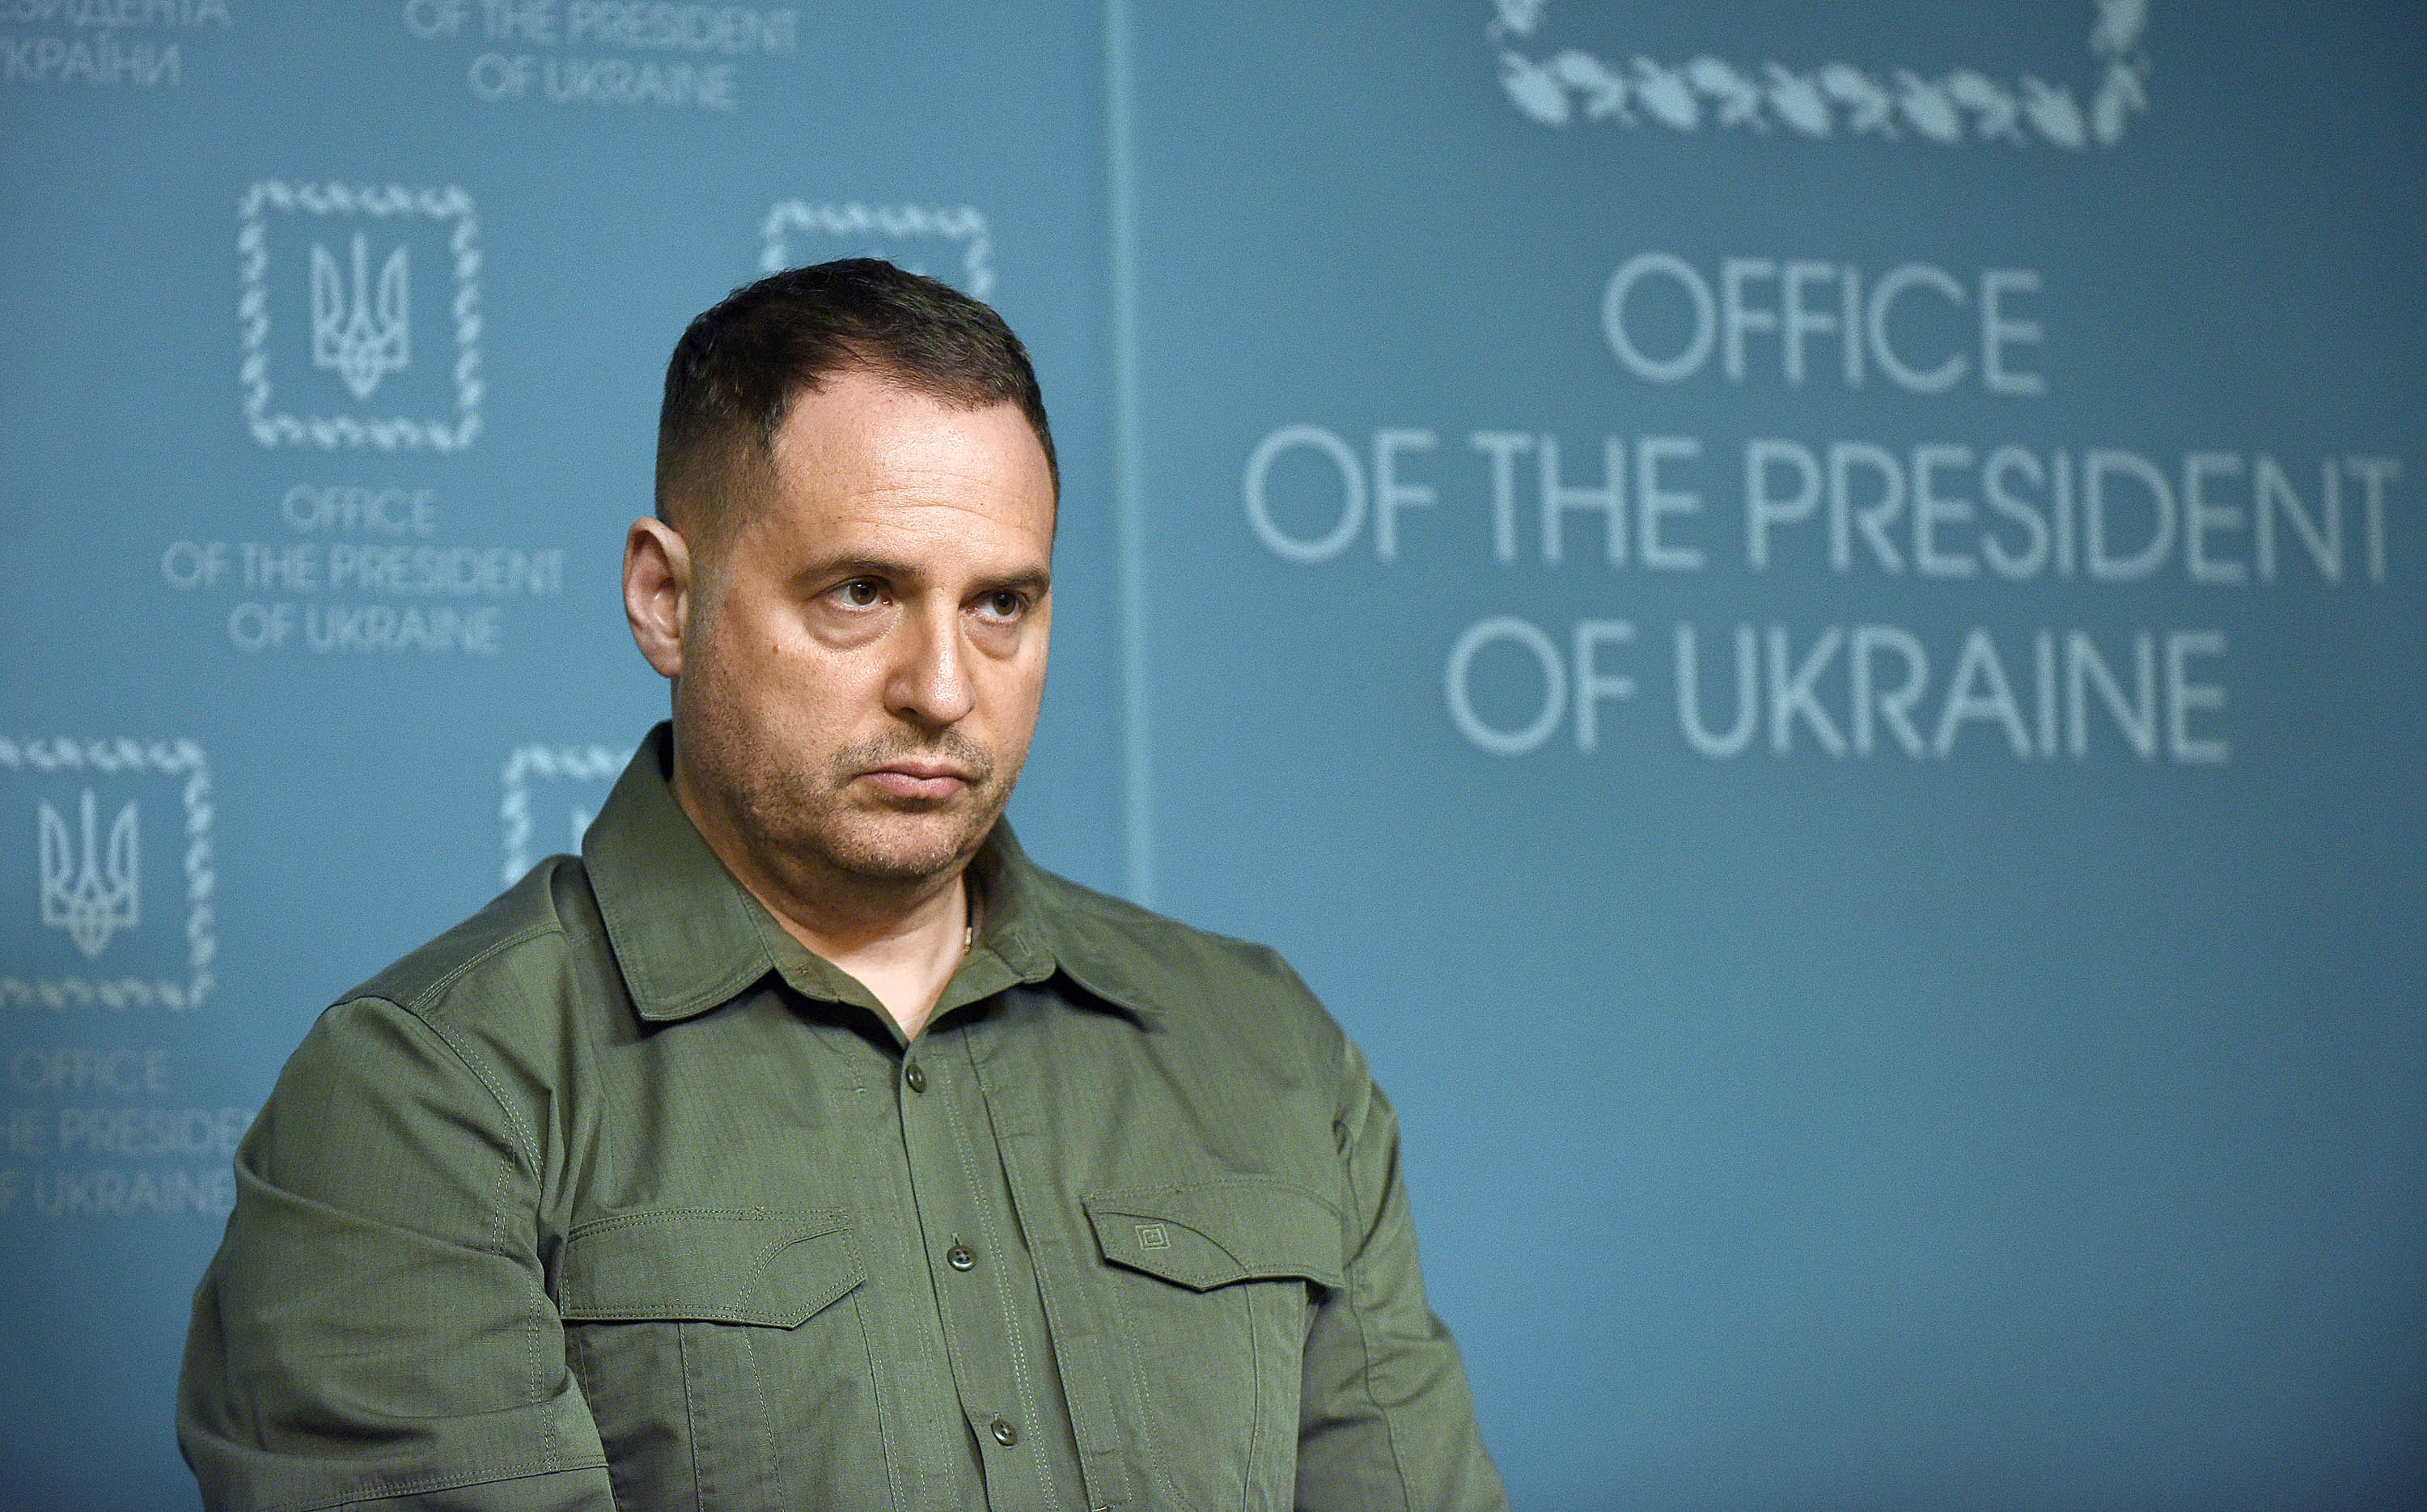 The head of Ukrainian President Volodymyr Zelensky's office, Andriy Yermak, is pictured during a briefing in Kyiv, Ukraine, on June 29.